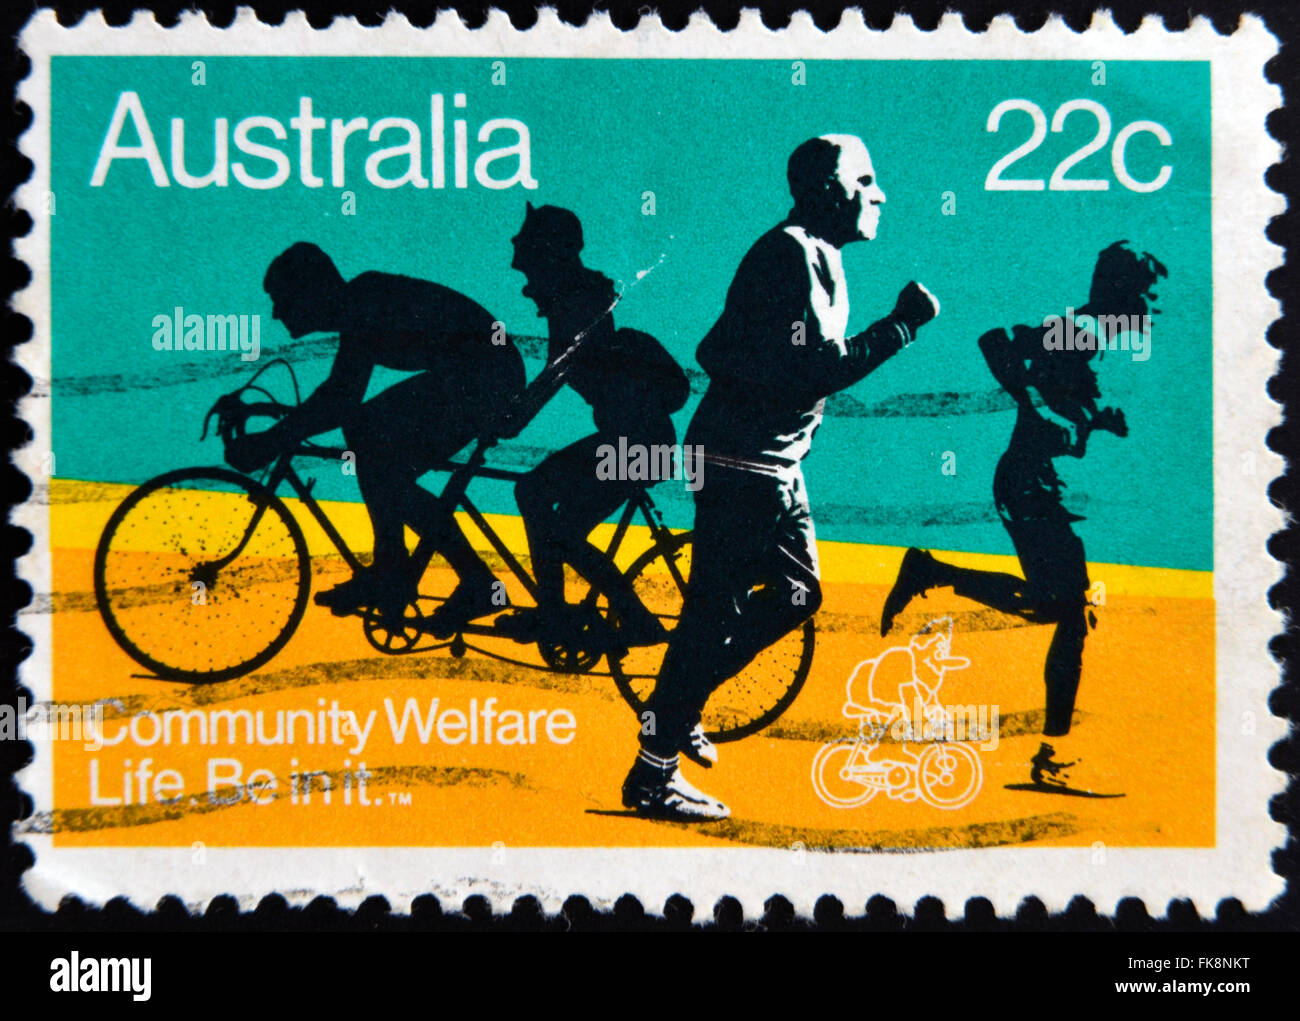 AUSTRALIA - CIRCA 1980: A stamp printed in Australia shows the Joggers and Bicyclists, with the inscription Community Welfare Stock Photo